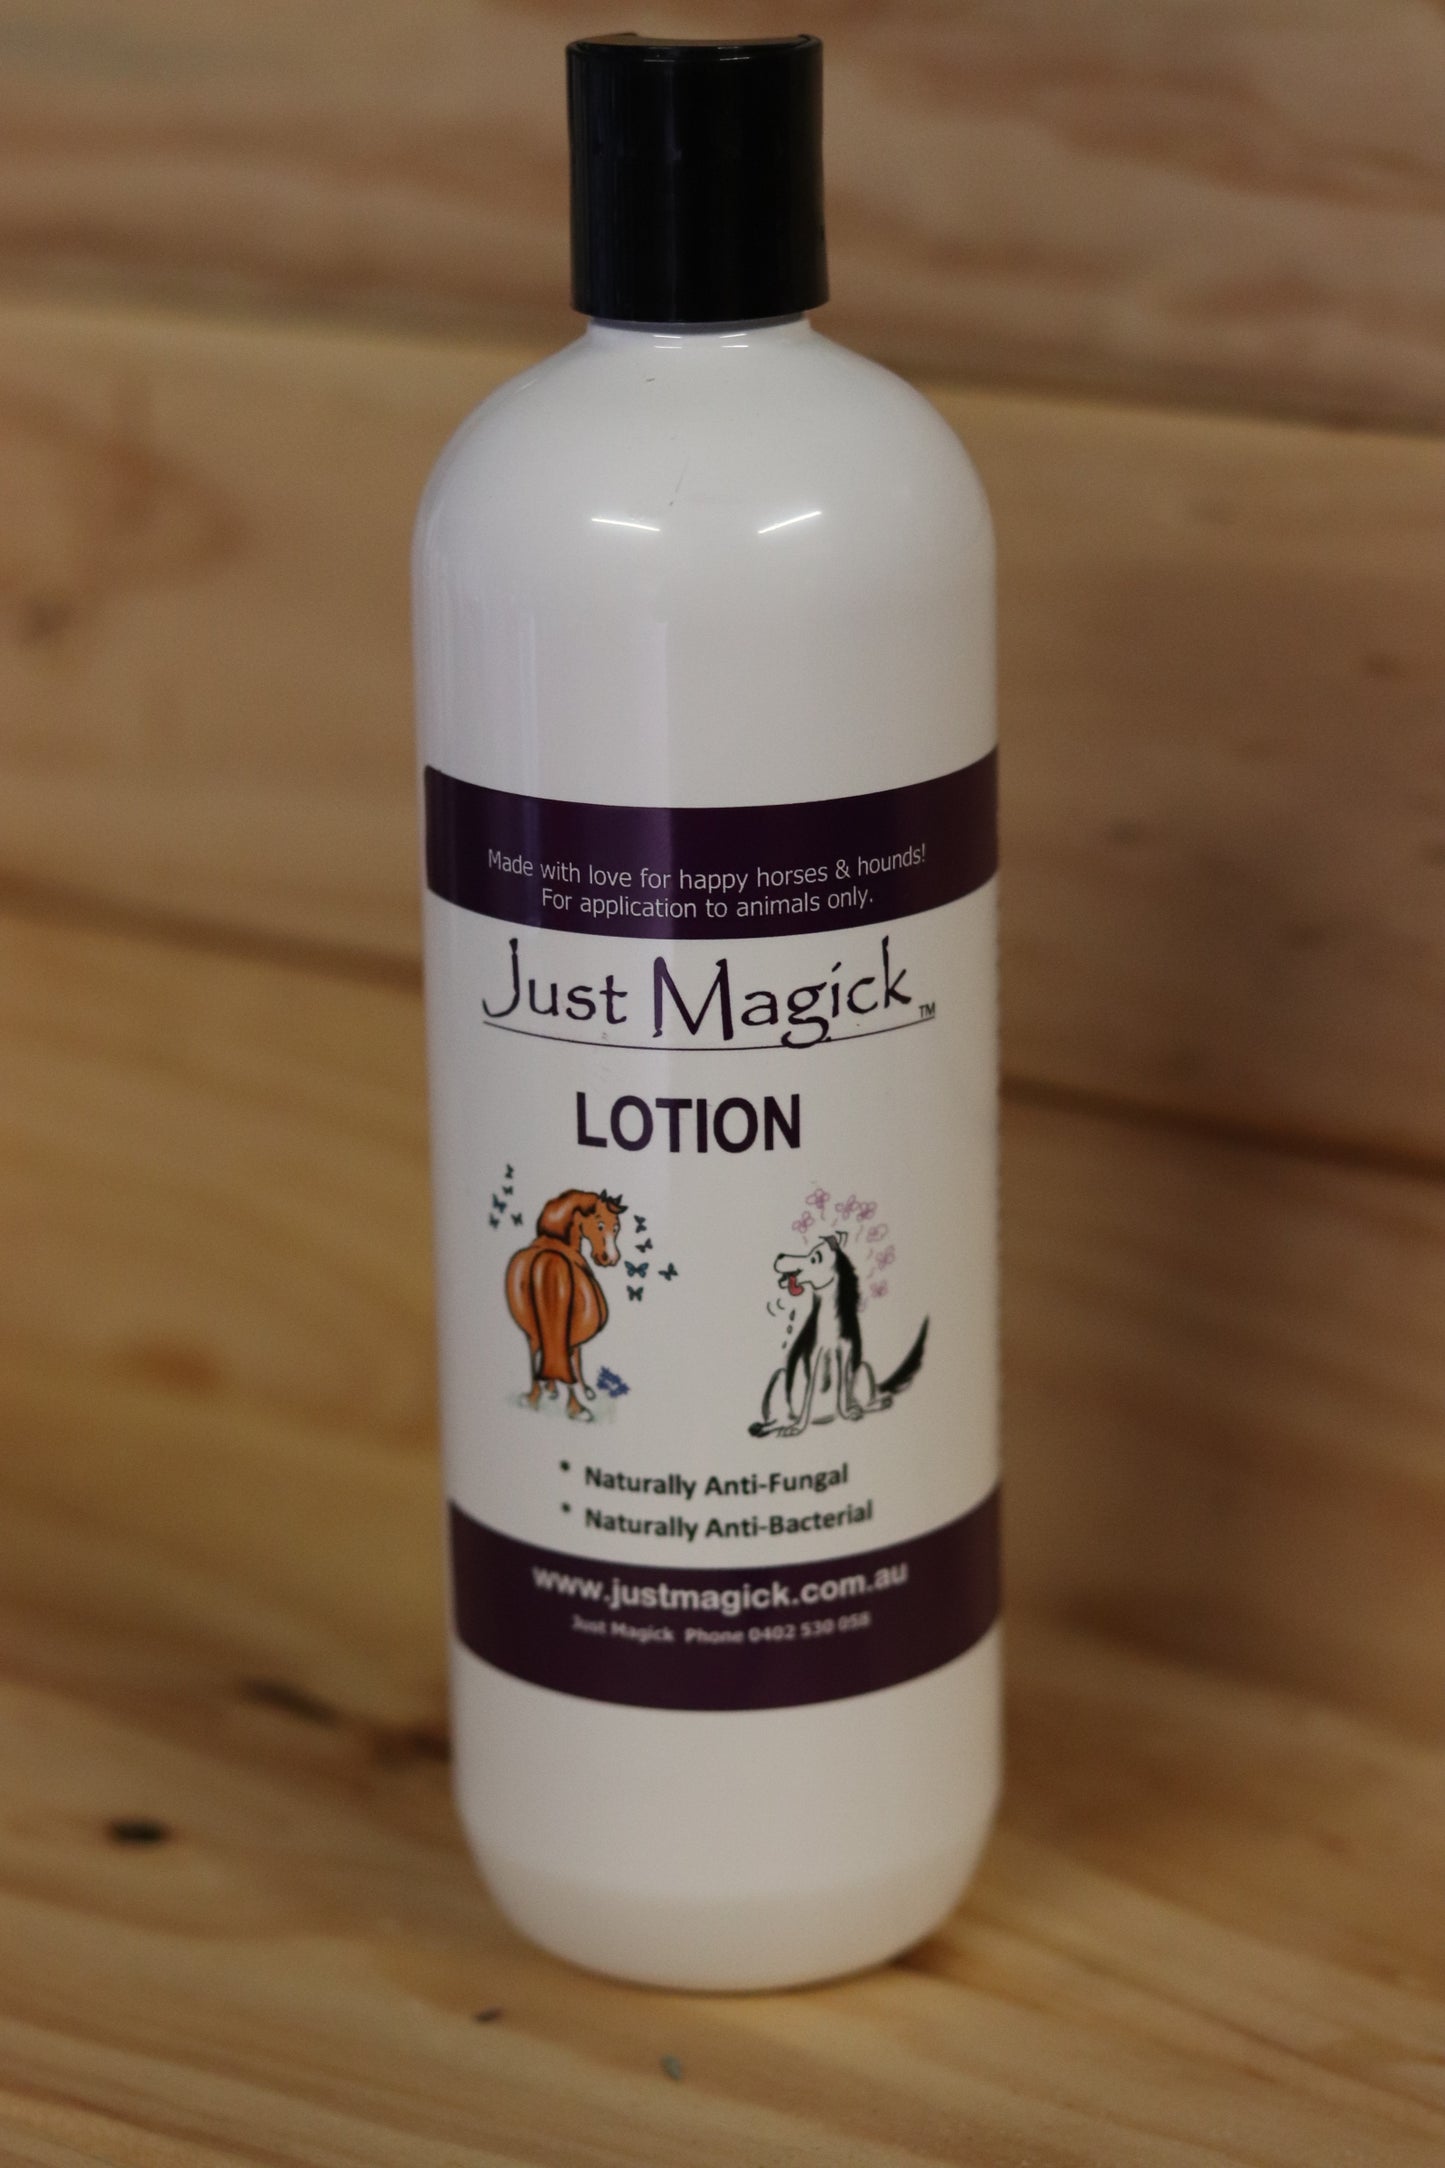 **JUST MAGICK LOTION FOR HORSES & HOUNDS